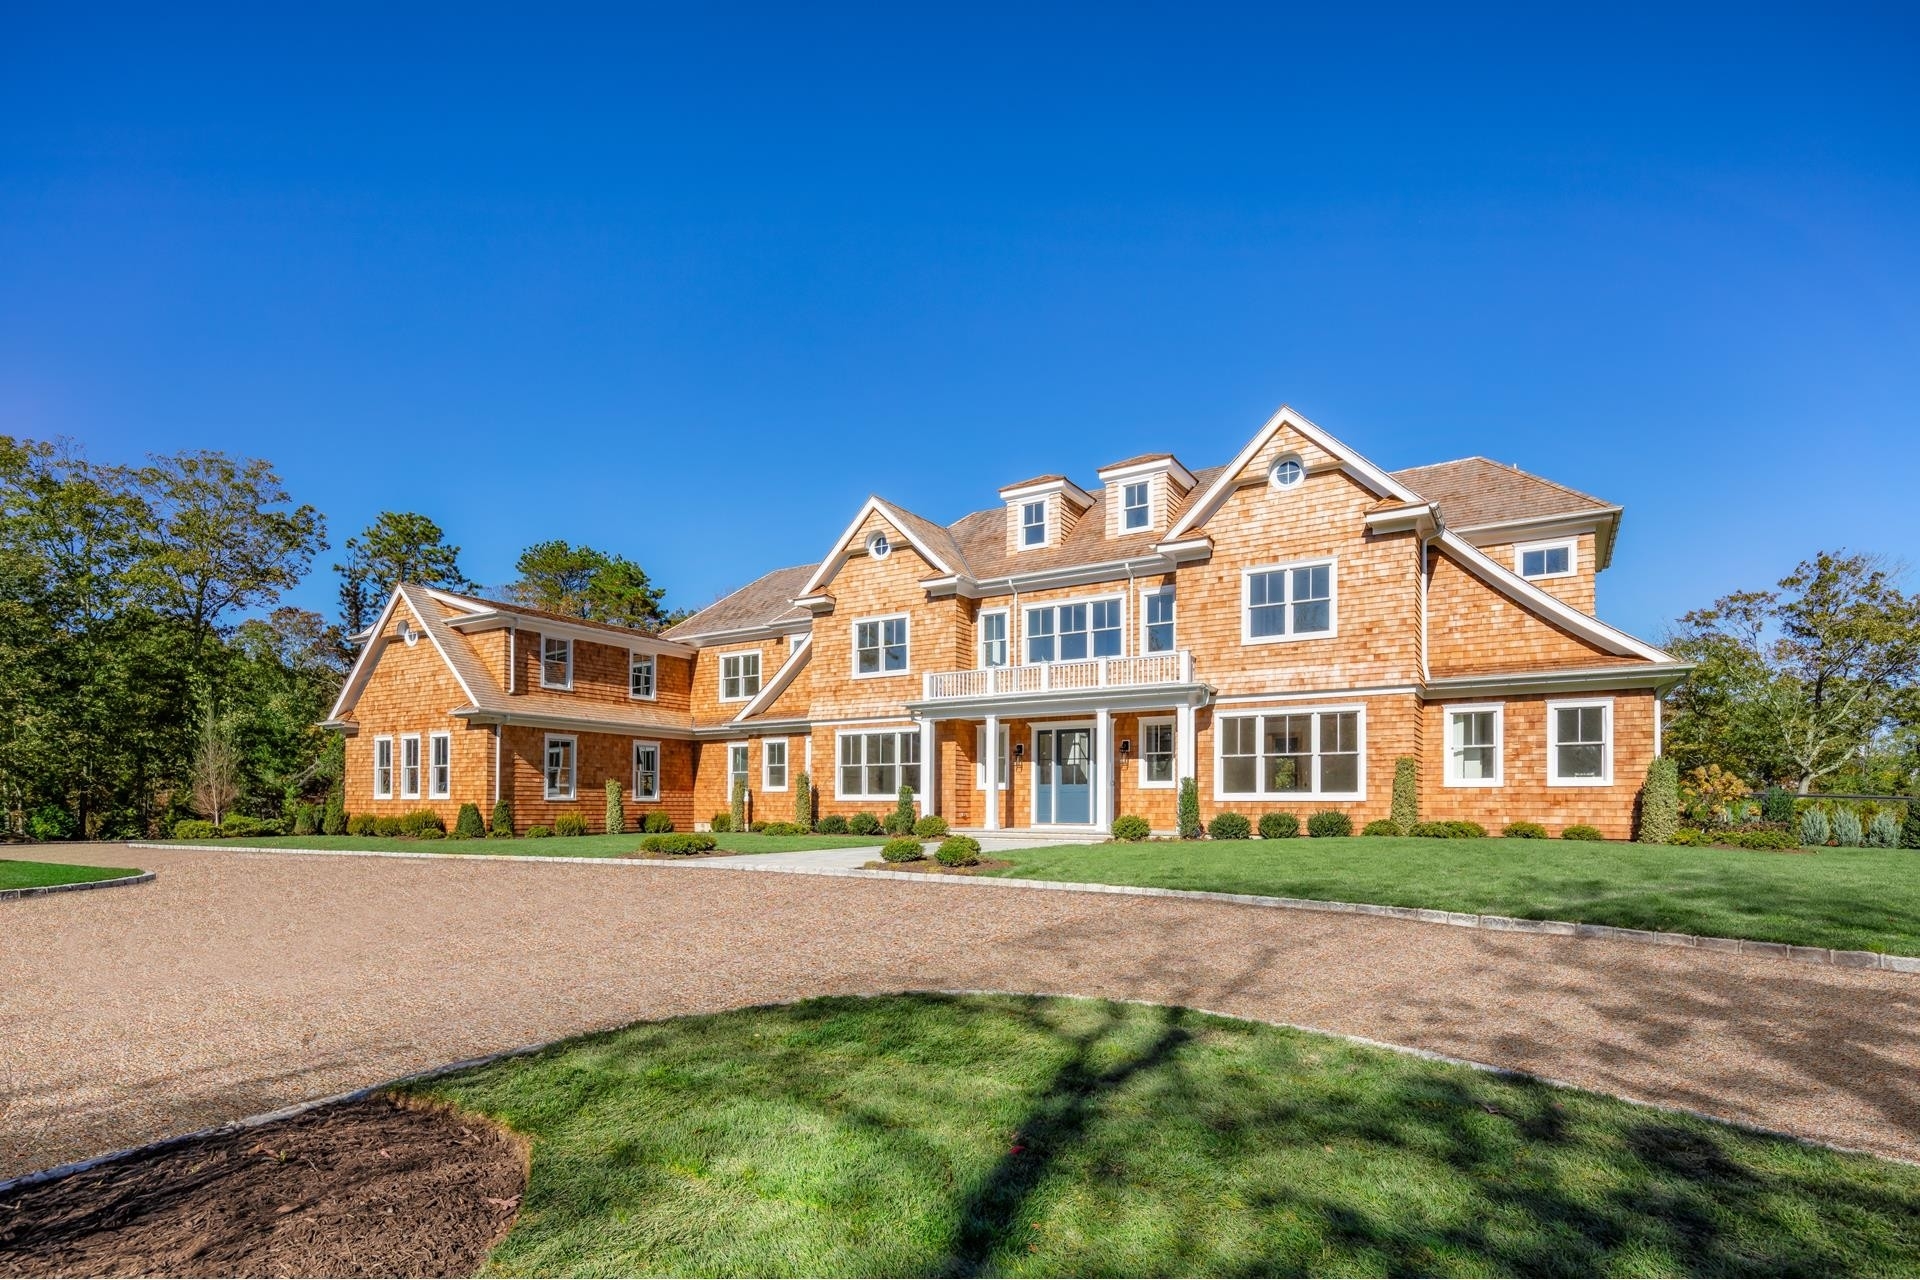 Single Family Home for Sale at Quogue Village, New York 11942